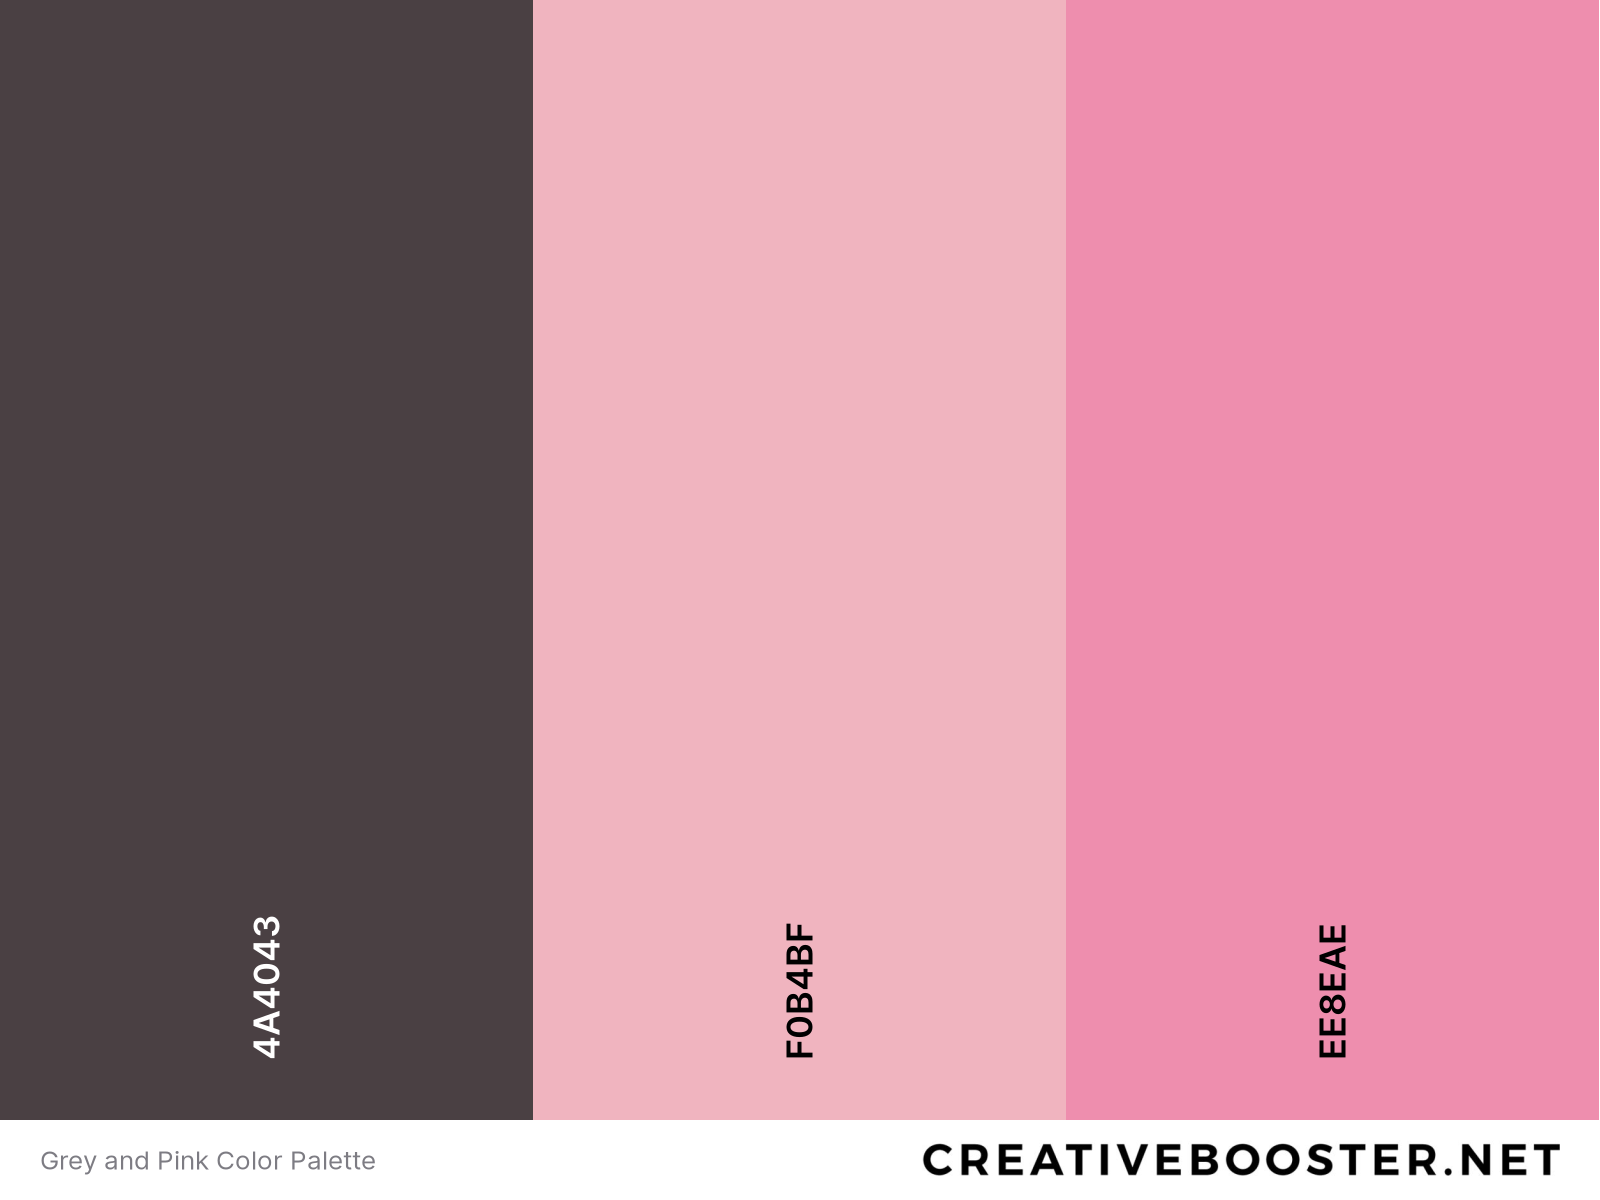 Grey and Pink Color Palette